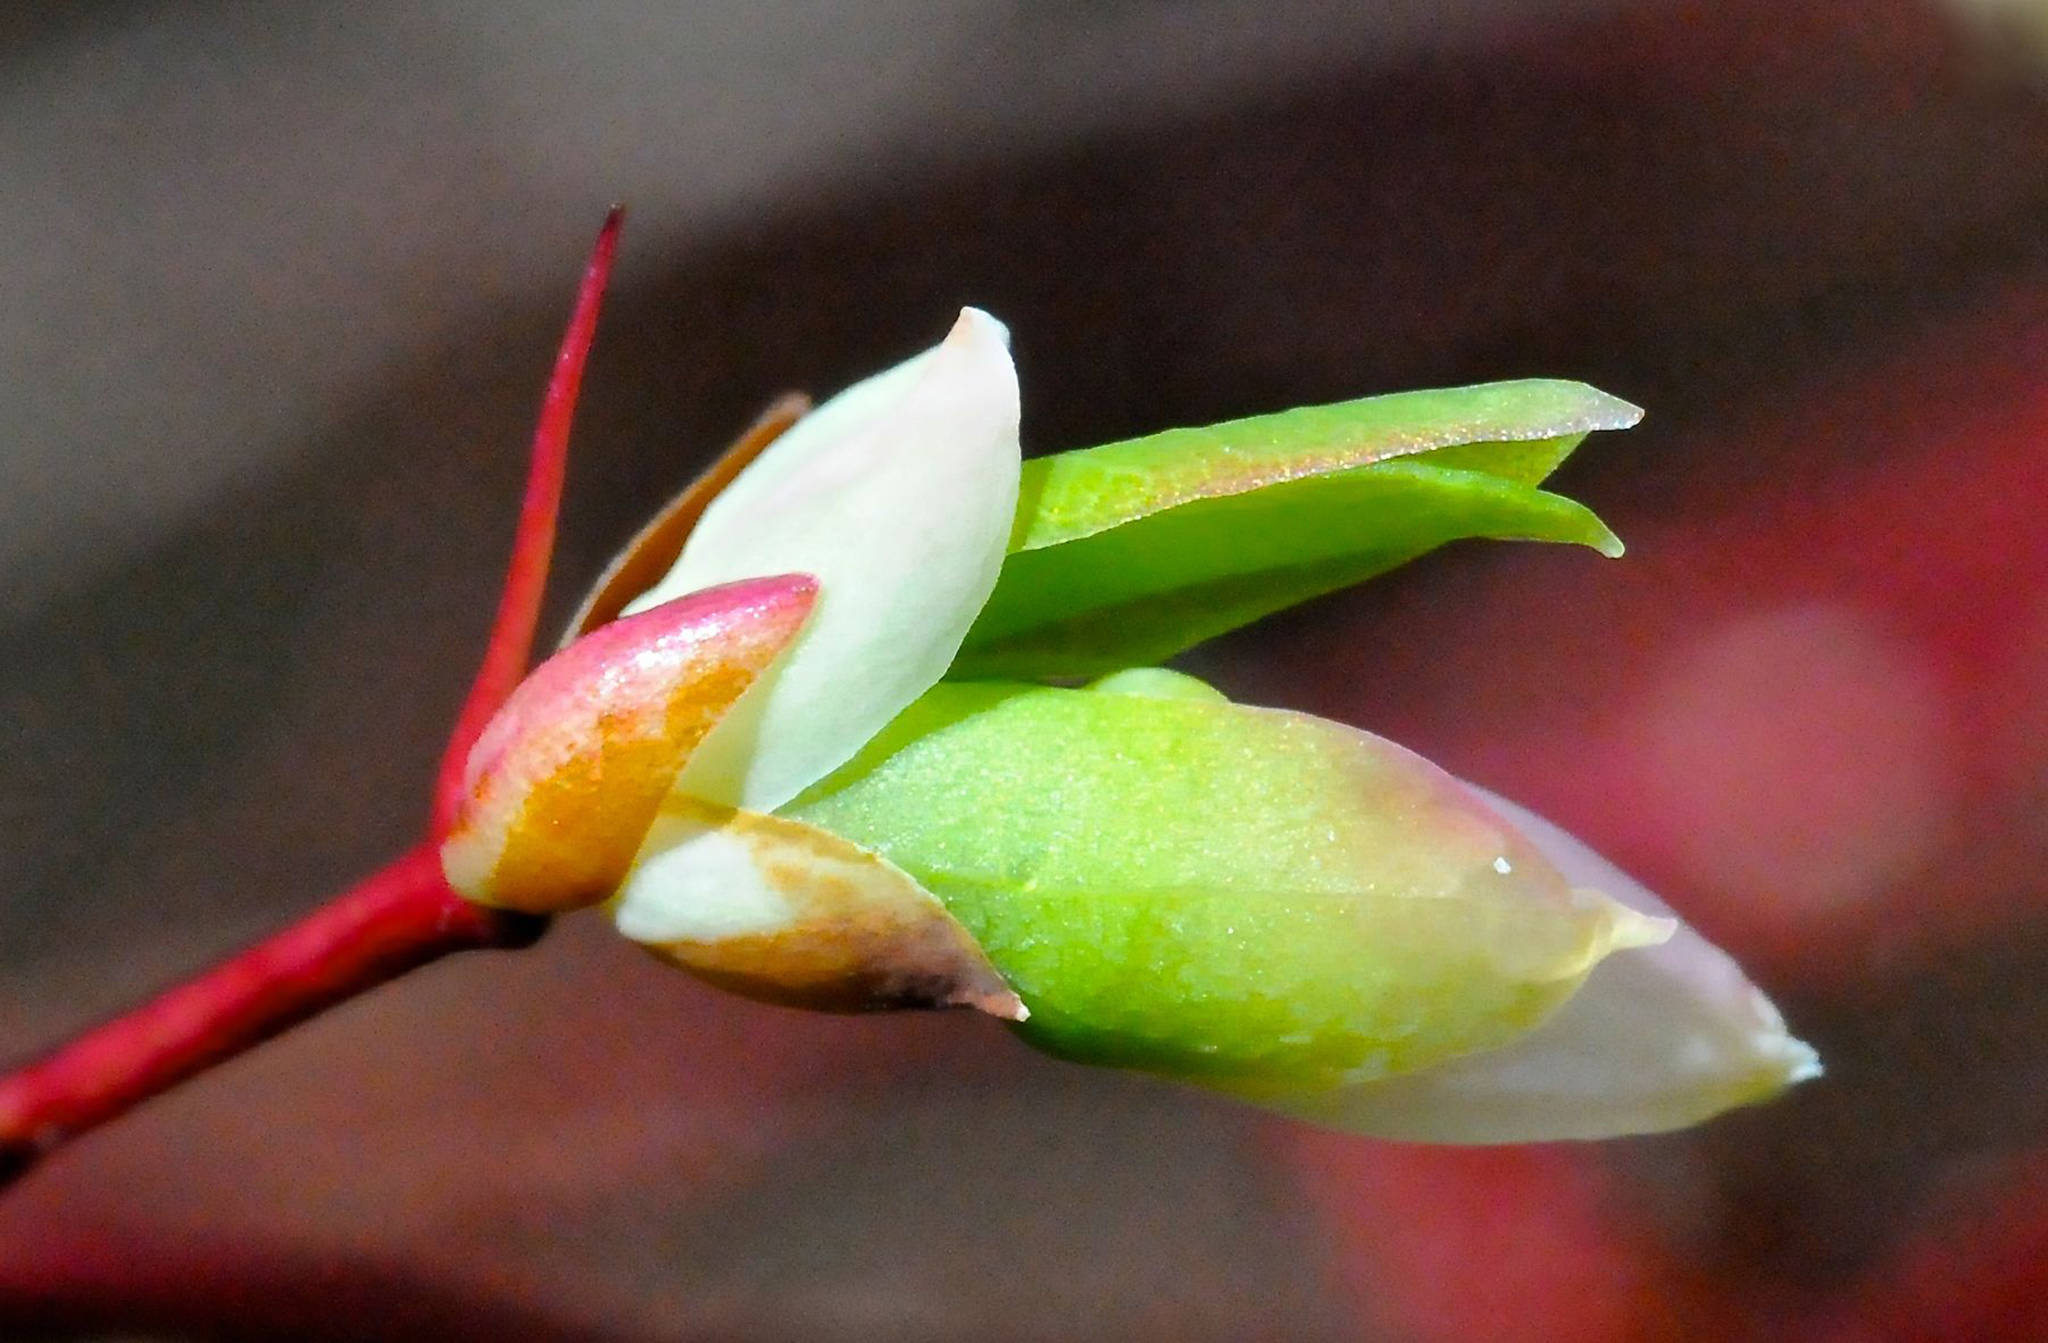 Sign of a new season: blueberry bud. Photo by Helen Unruh.